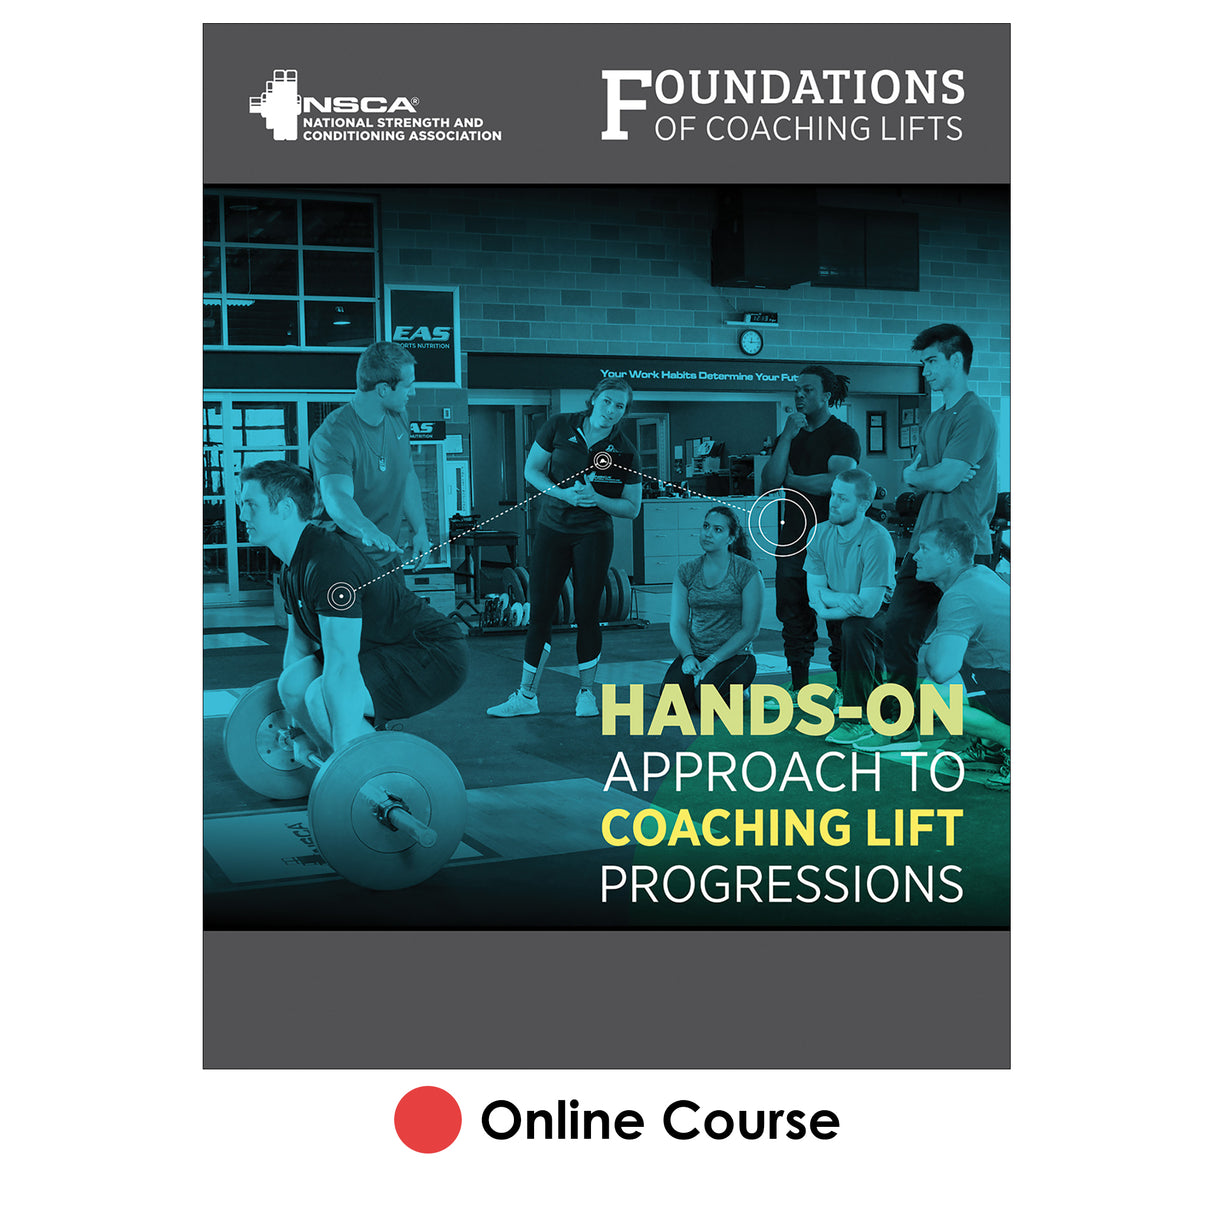 NSCA’s Foundations of Coaching Lifts Online Course, Academic Version